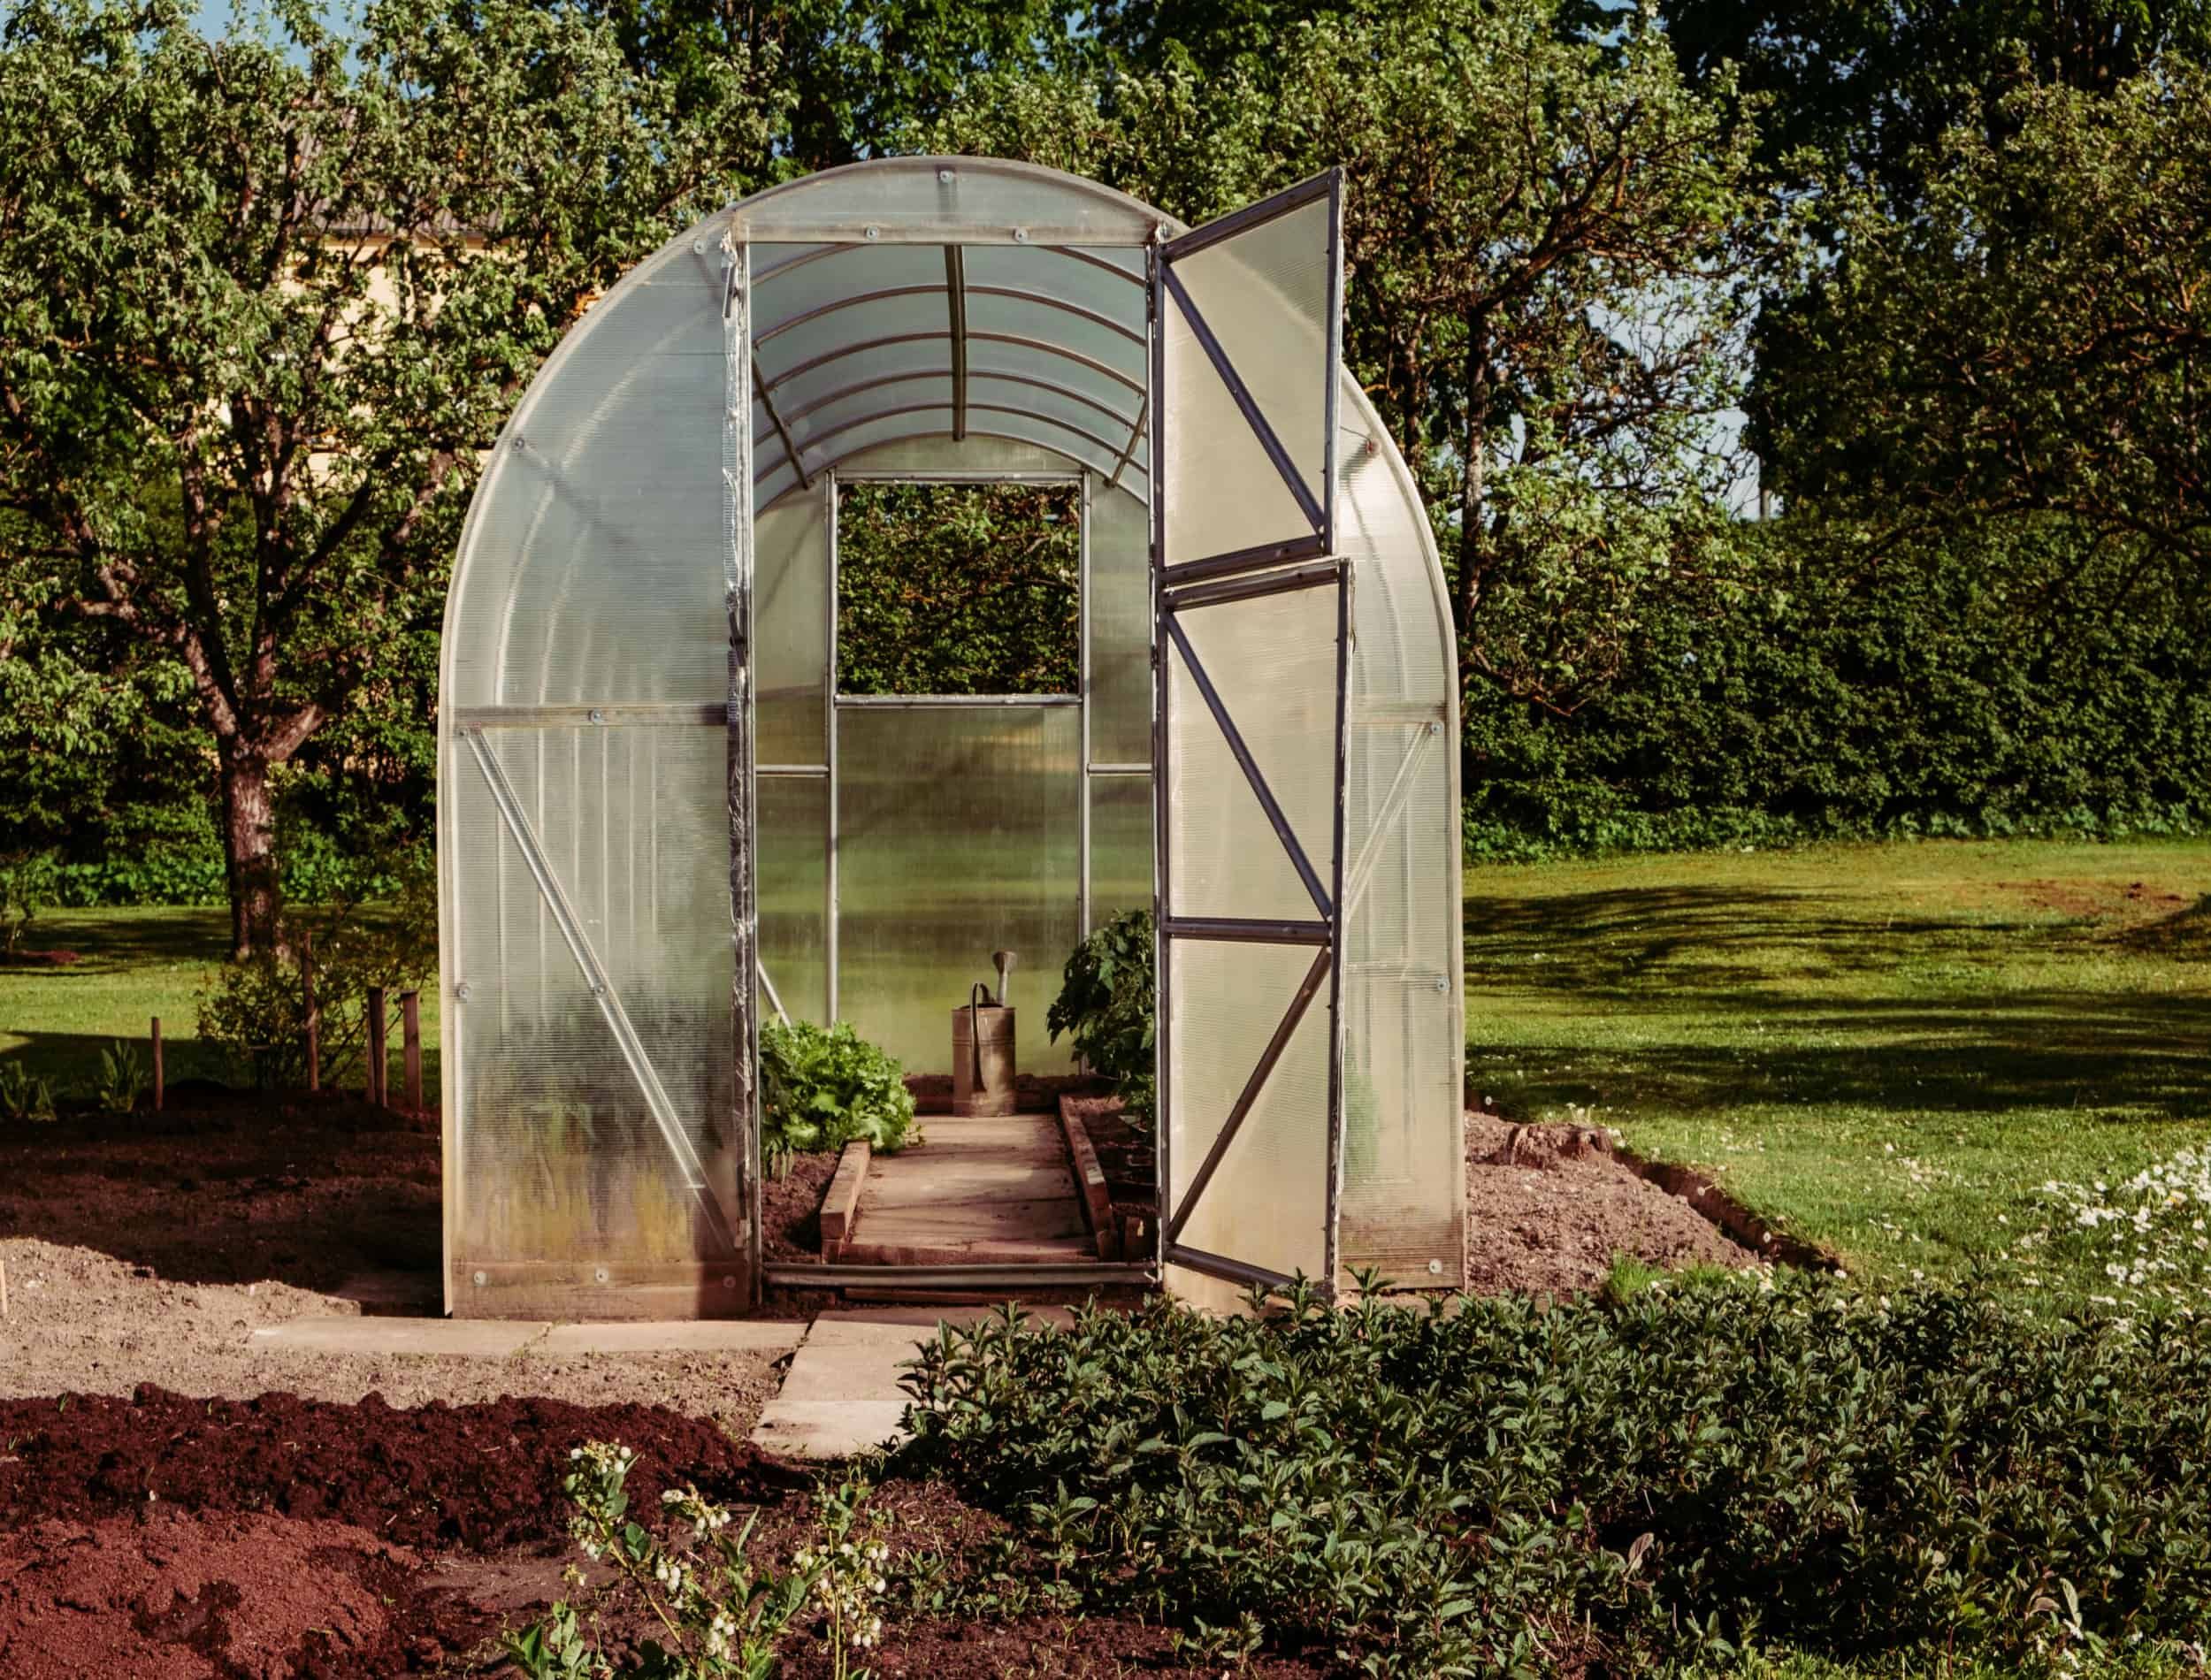 Polycarbonate greenhouse in the garden for growing your own fresh food with doors open and a watering can